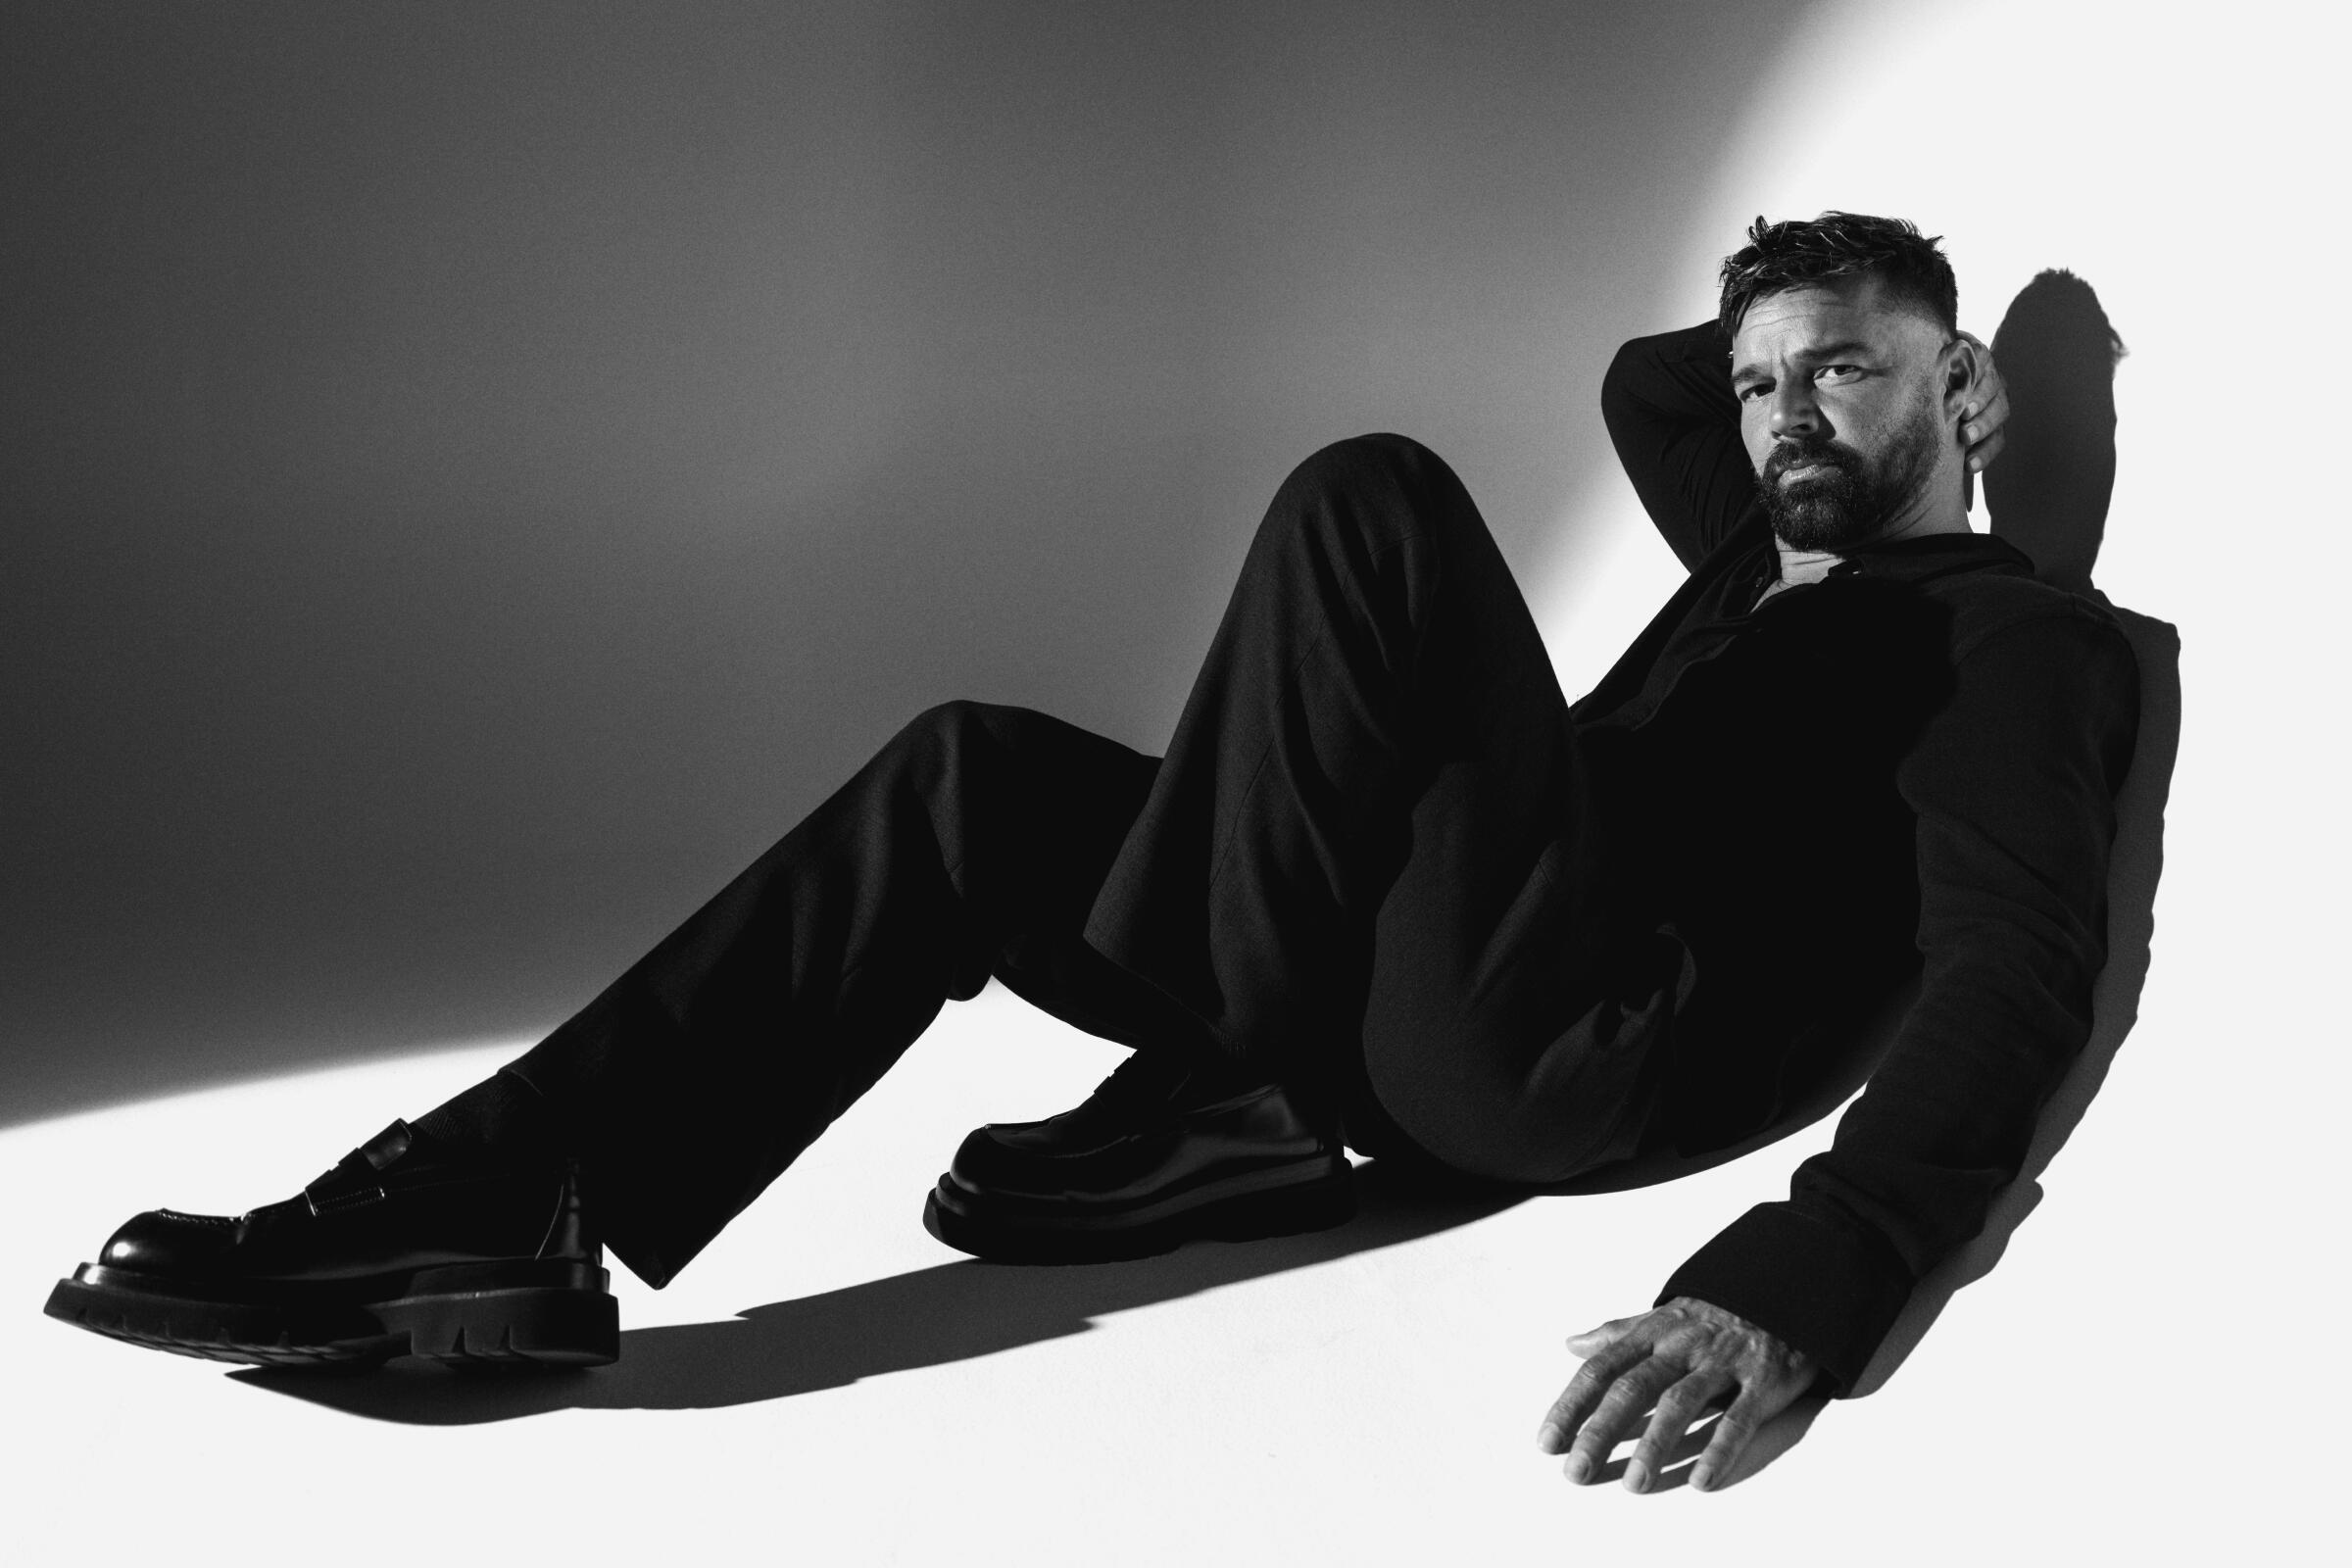 Ricky Martin leans back against a stark backdrop for a black-and-white portrait.